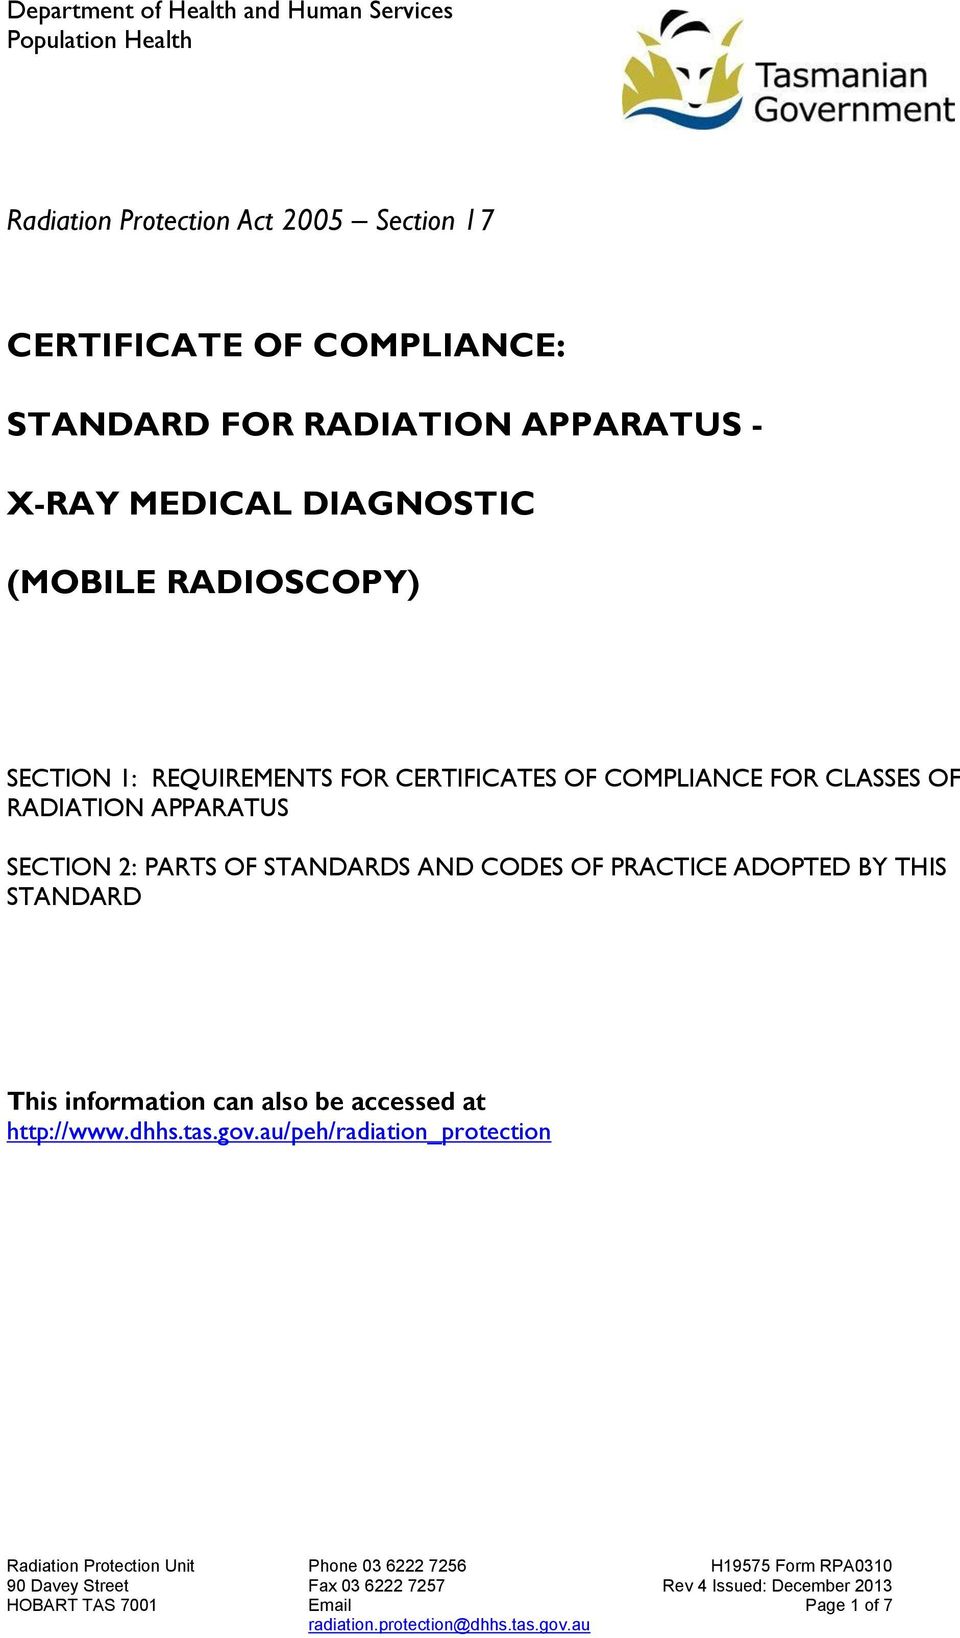 CERTIFICATES OF COMPLIANCE FOR CLASSES OF RADIATION APPARATUS SECTION 2: PARTS OF STANDARDS AND CODES OF PRACTICE